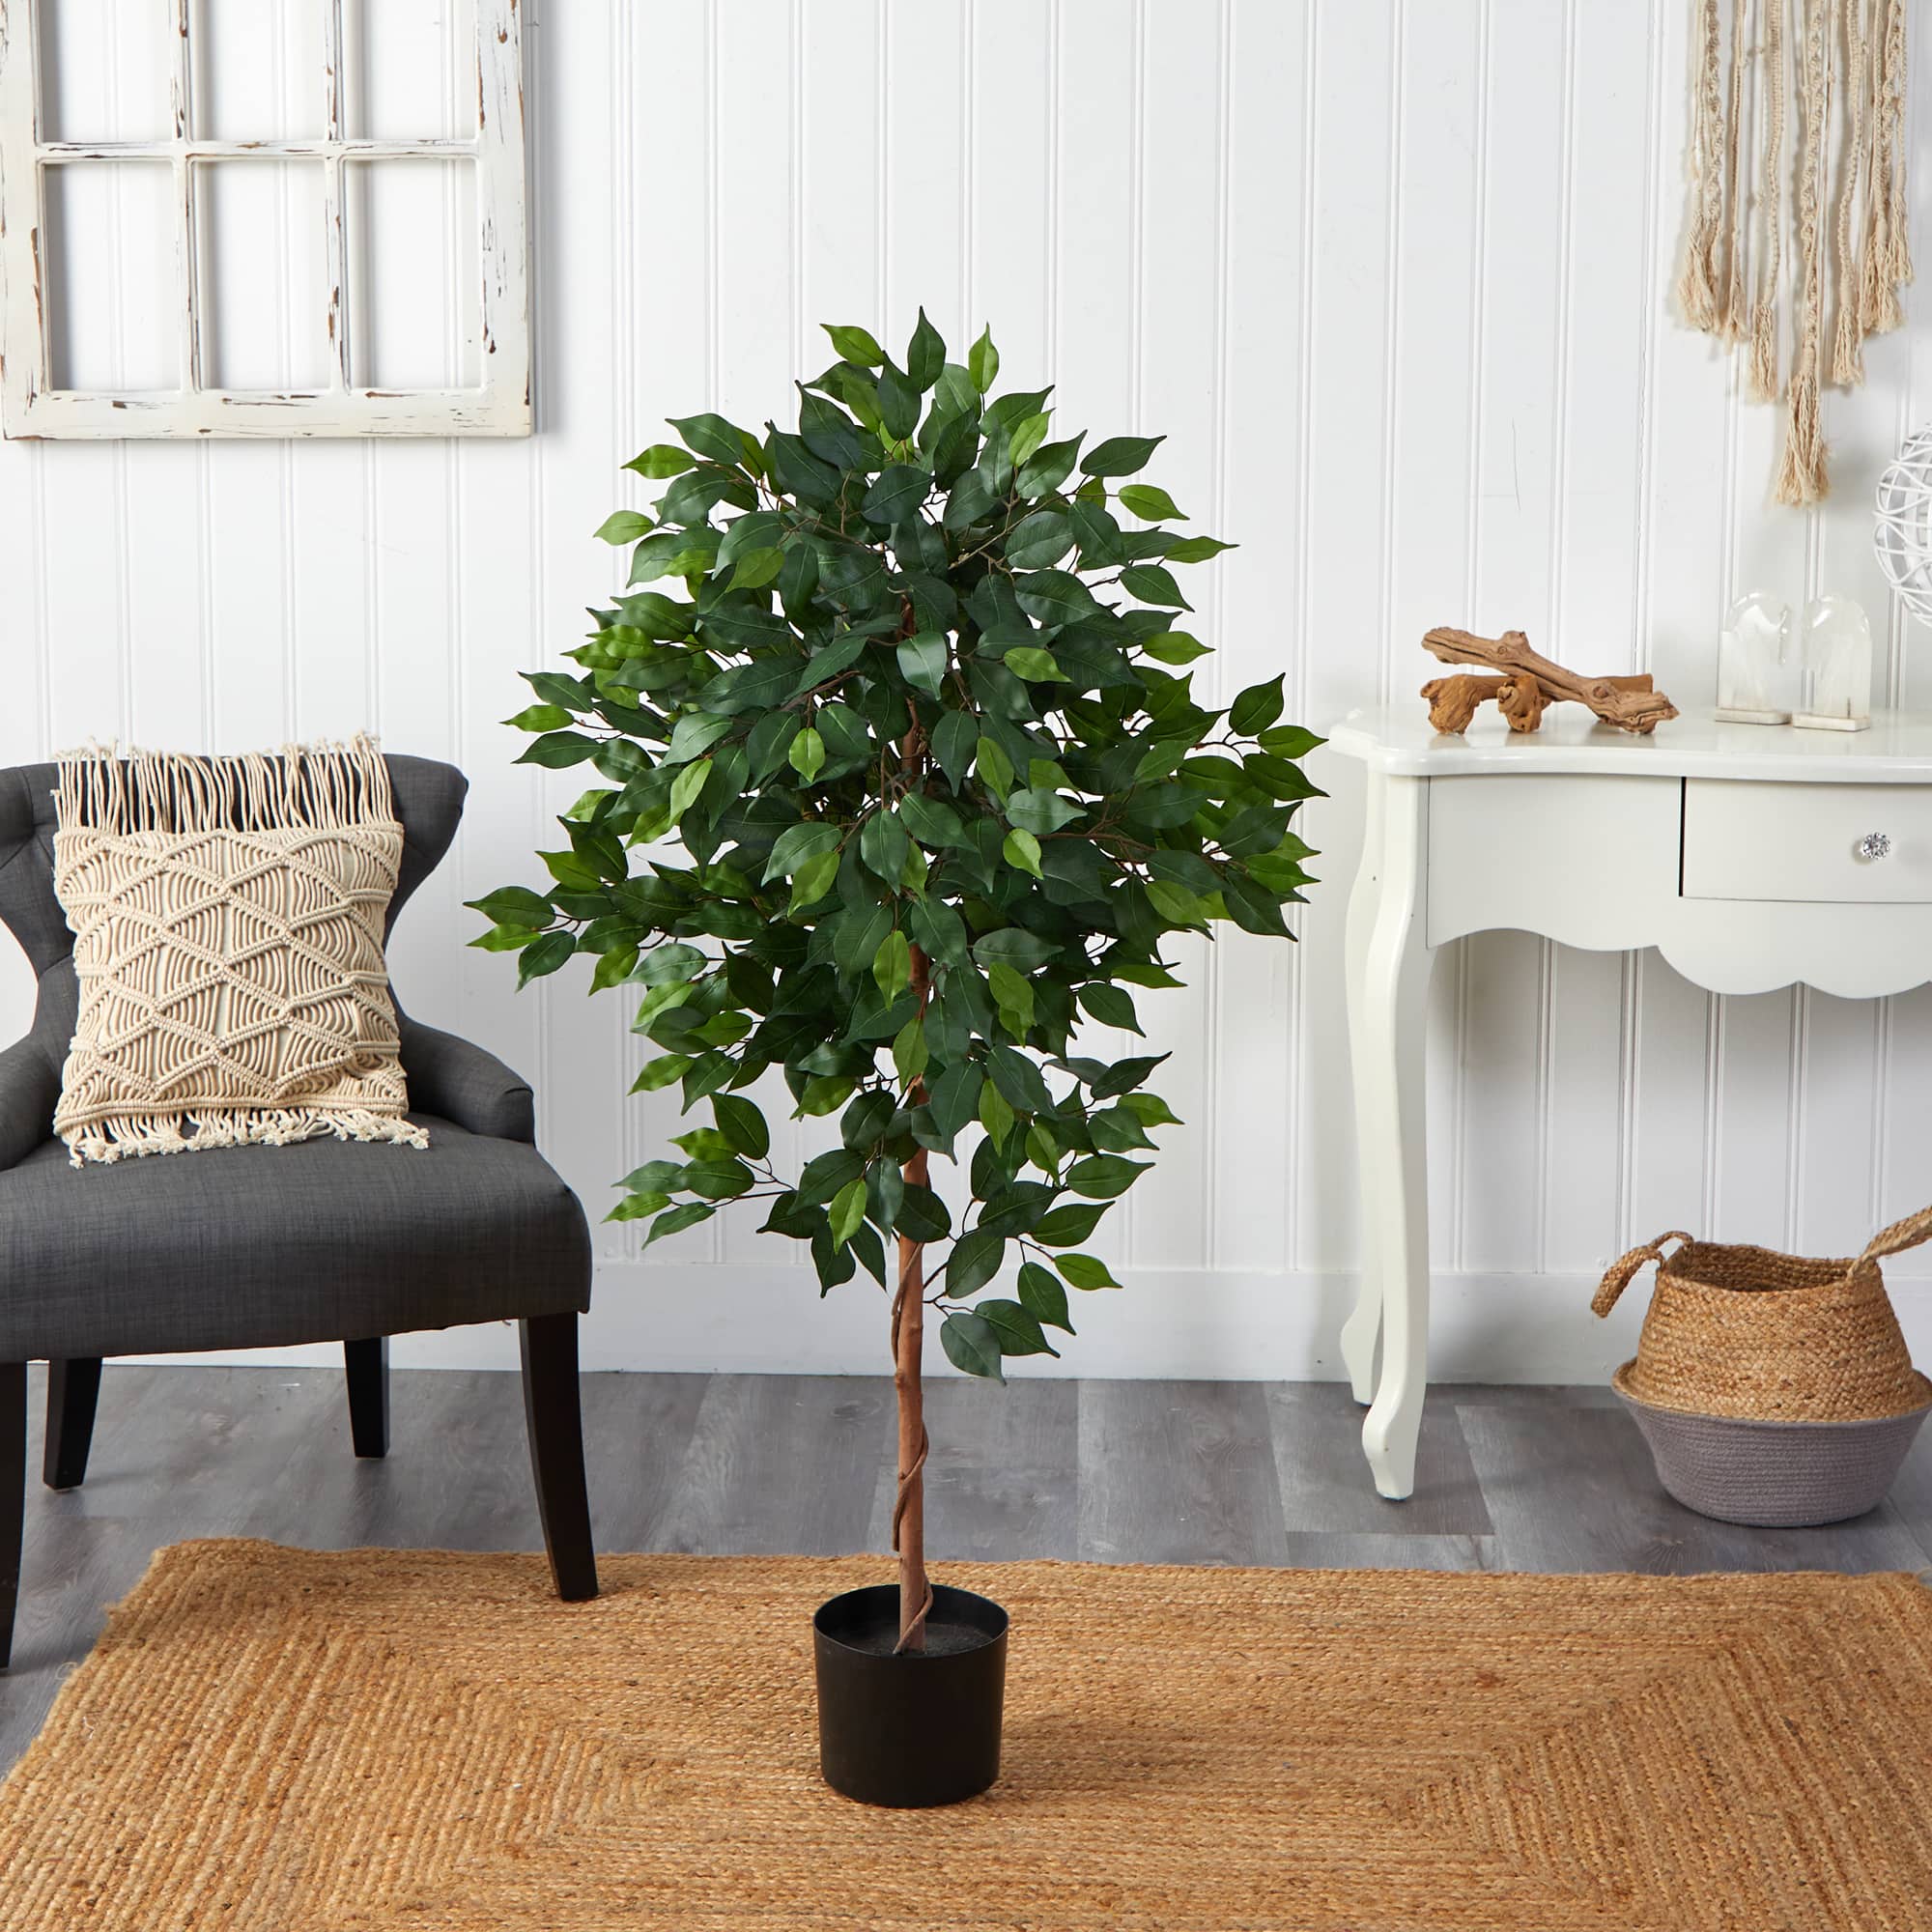 4ft. Potted Ficus Tree